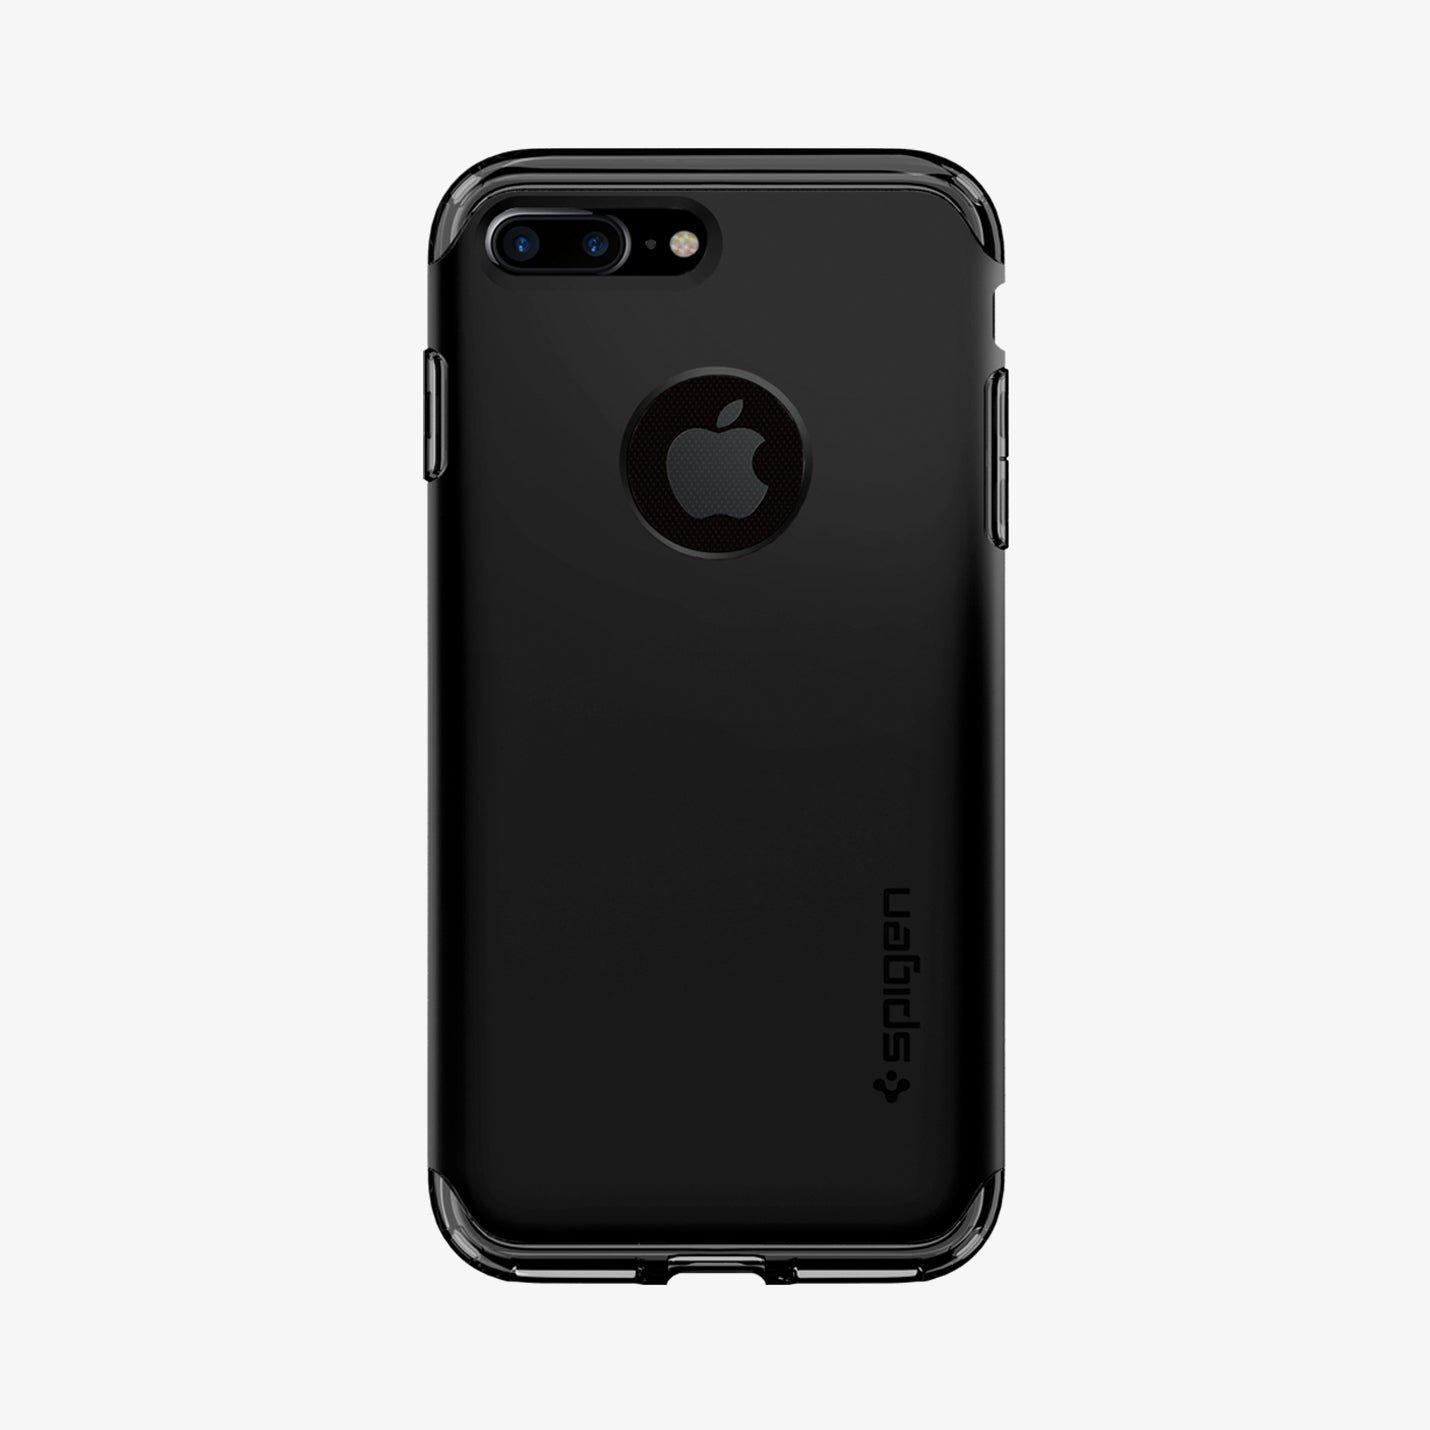 043CS20850 - iPhone 7 Plus Case Hybrid Armor in Black showing the back